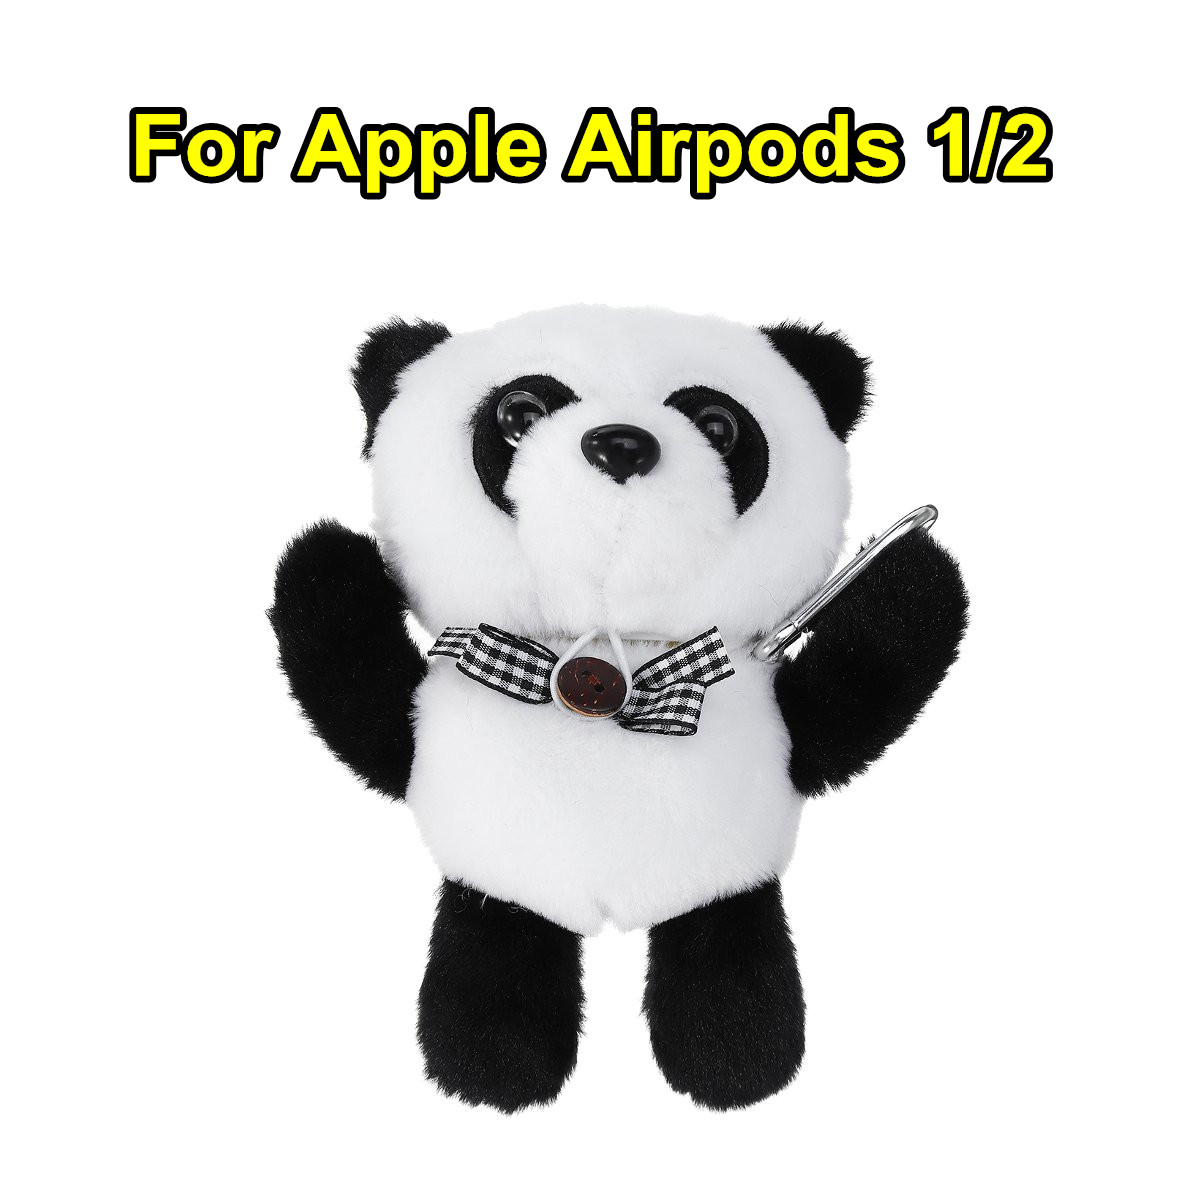 Plush-Panda-Cartoon-Earphone-Storage-Case-For-Airpods-1-2-Shockproof-Dust-proof-Protective-Headset-C-1684940-1